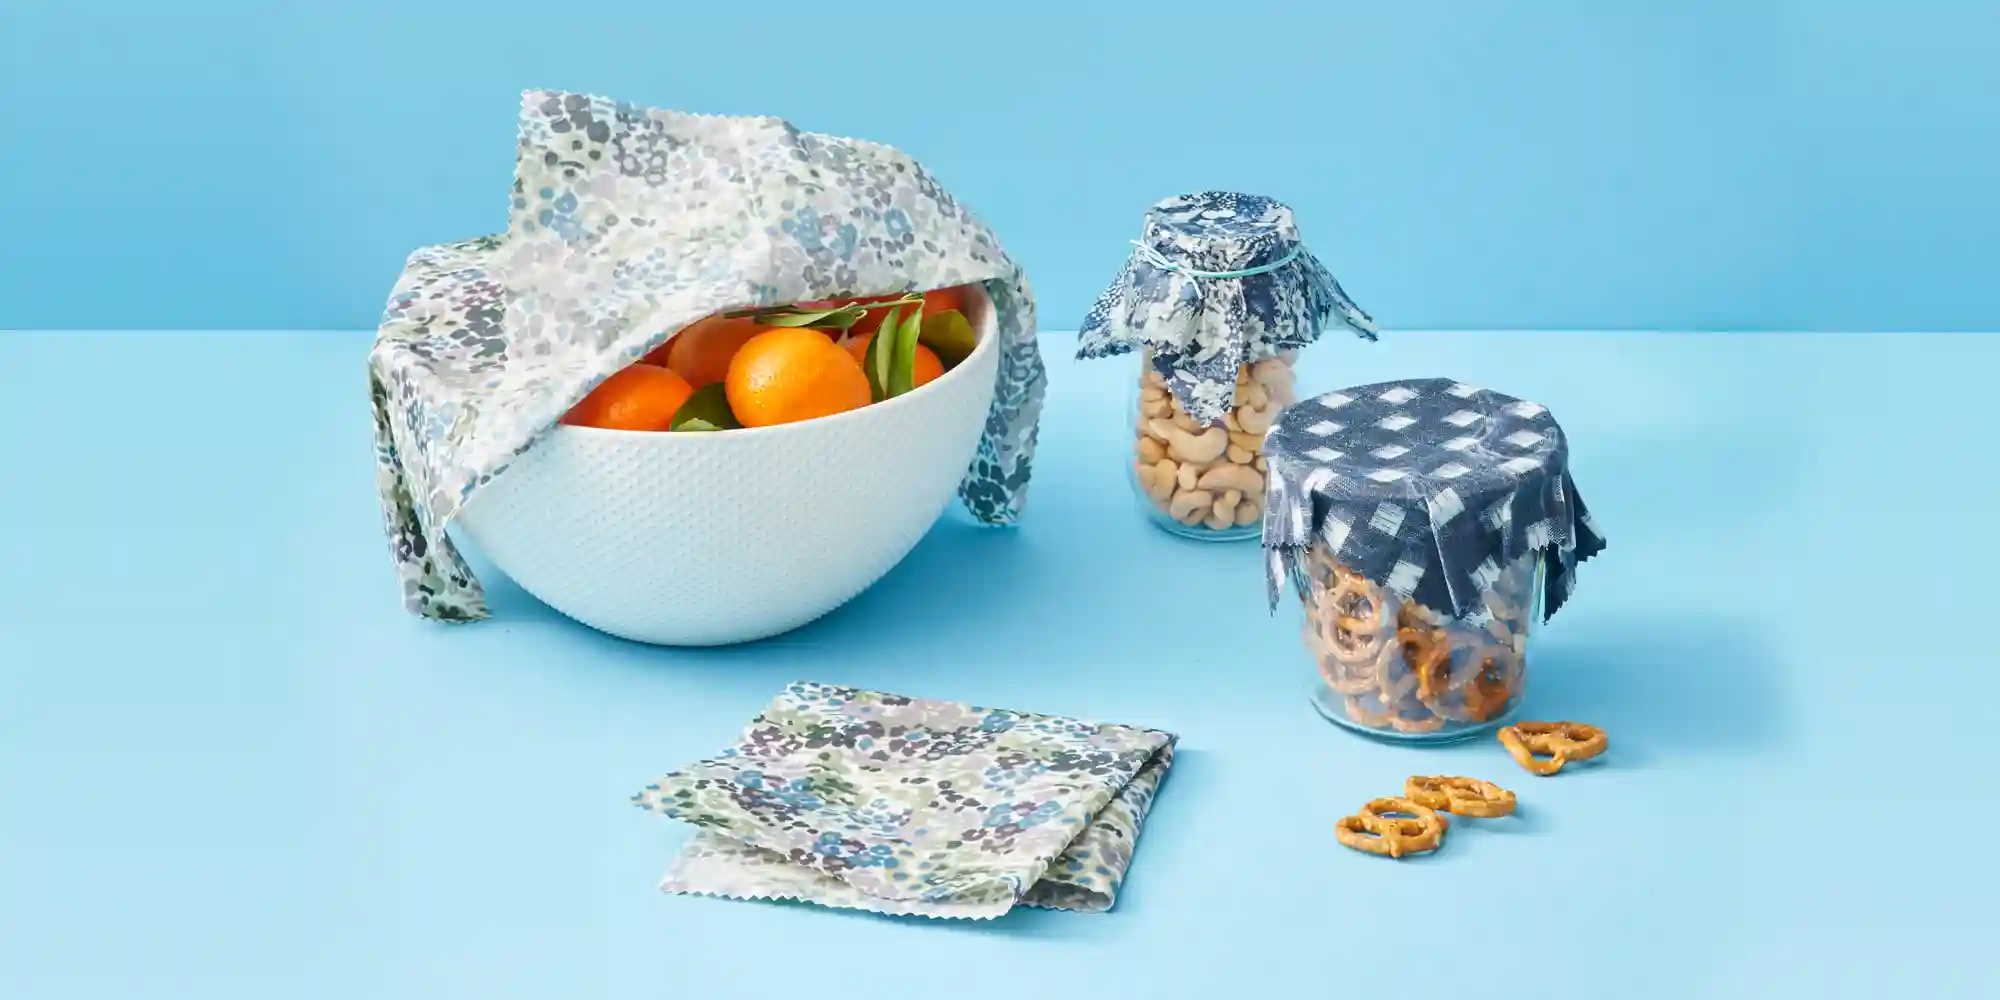 Here Are 5 Benefits of Purchasing Beeswax Wraps Online